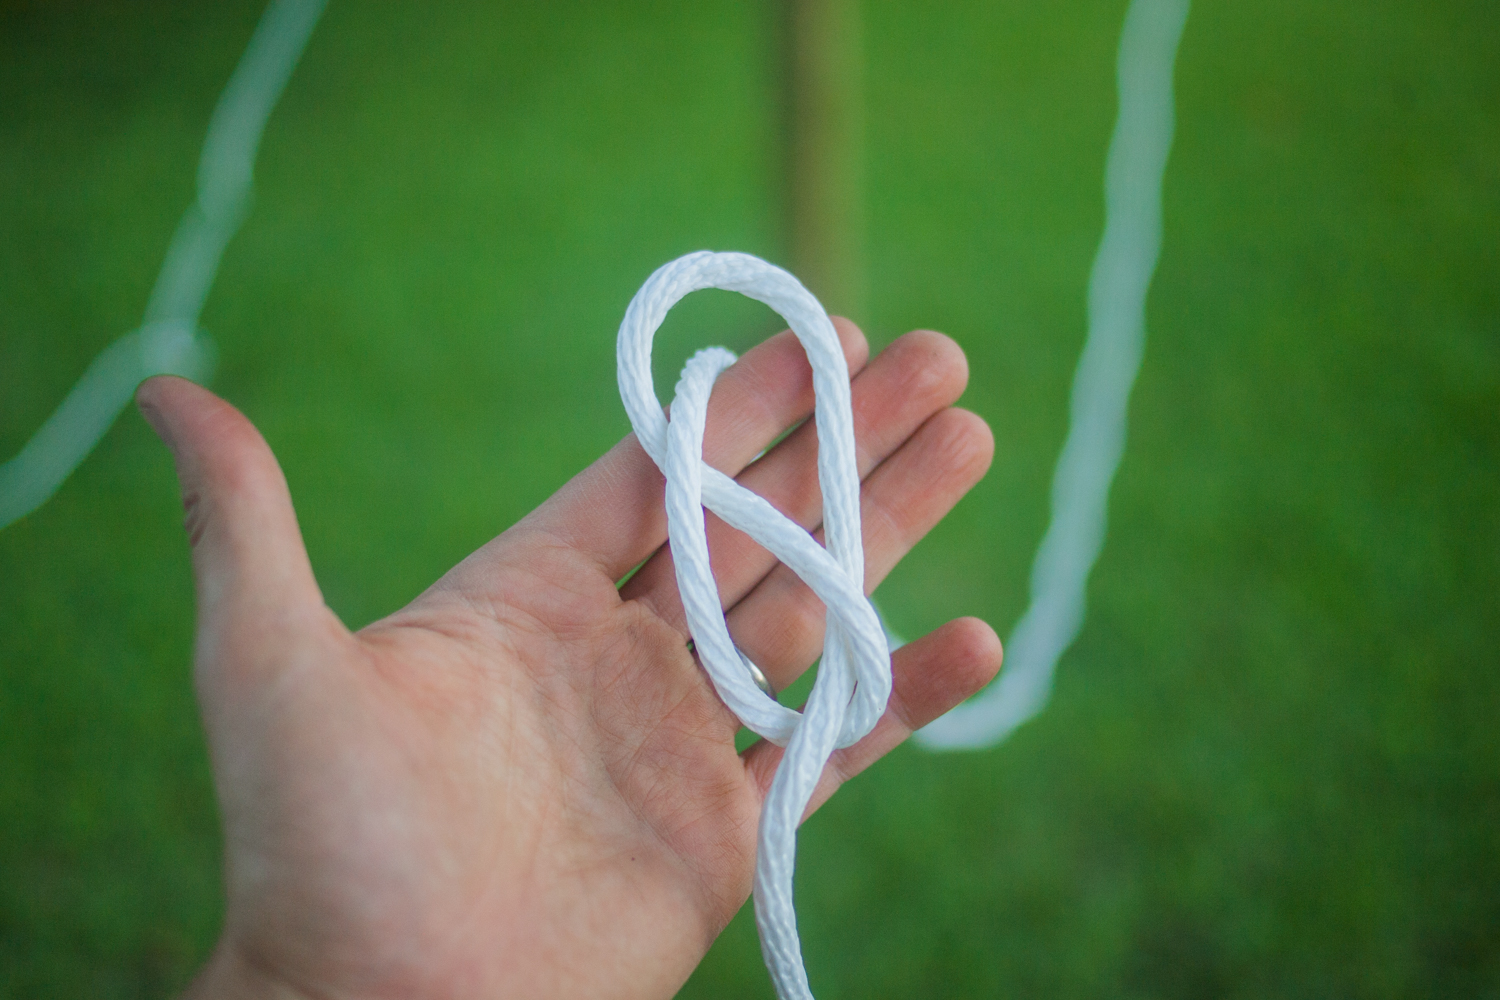 tying a double figure 8 knot